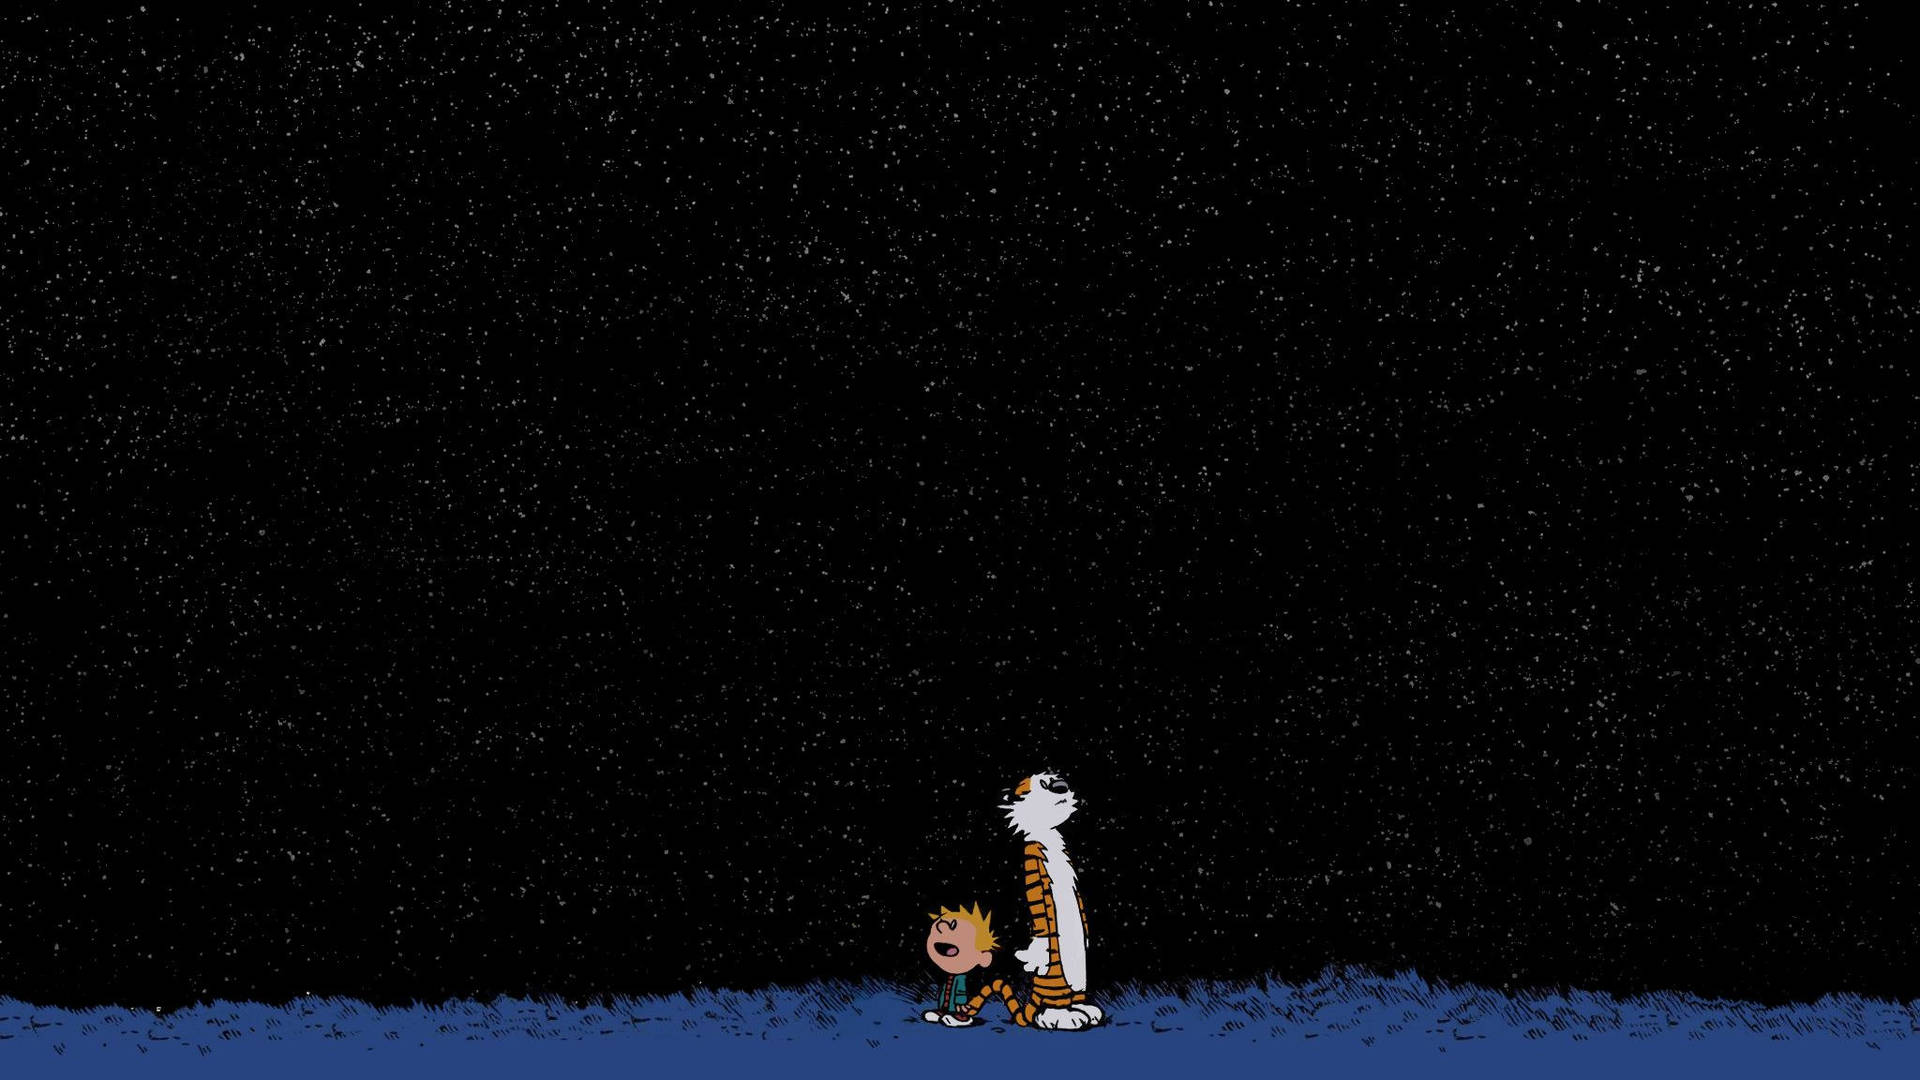 Top 999+ Calvin And Hobbes Wallpaper Full HD, 4K✅Free to Use